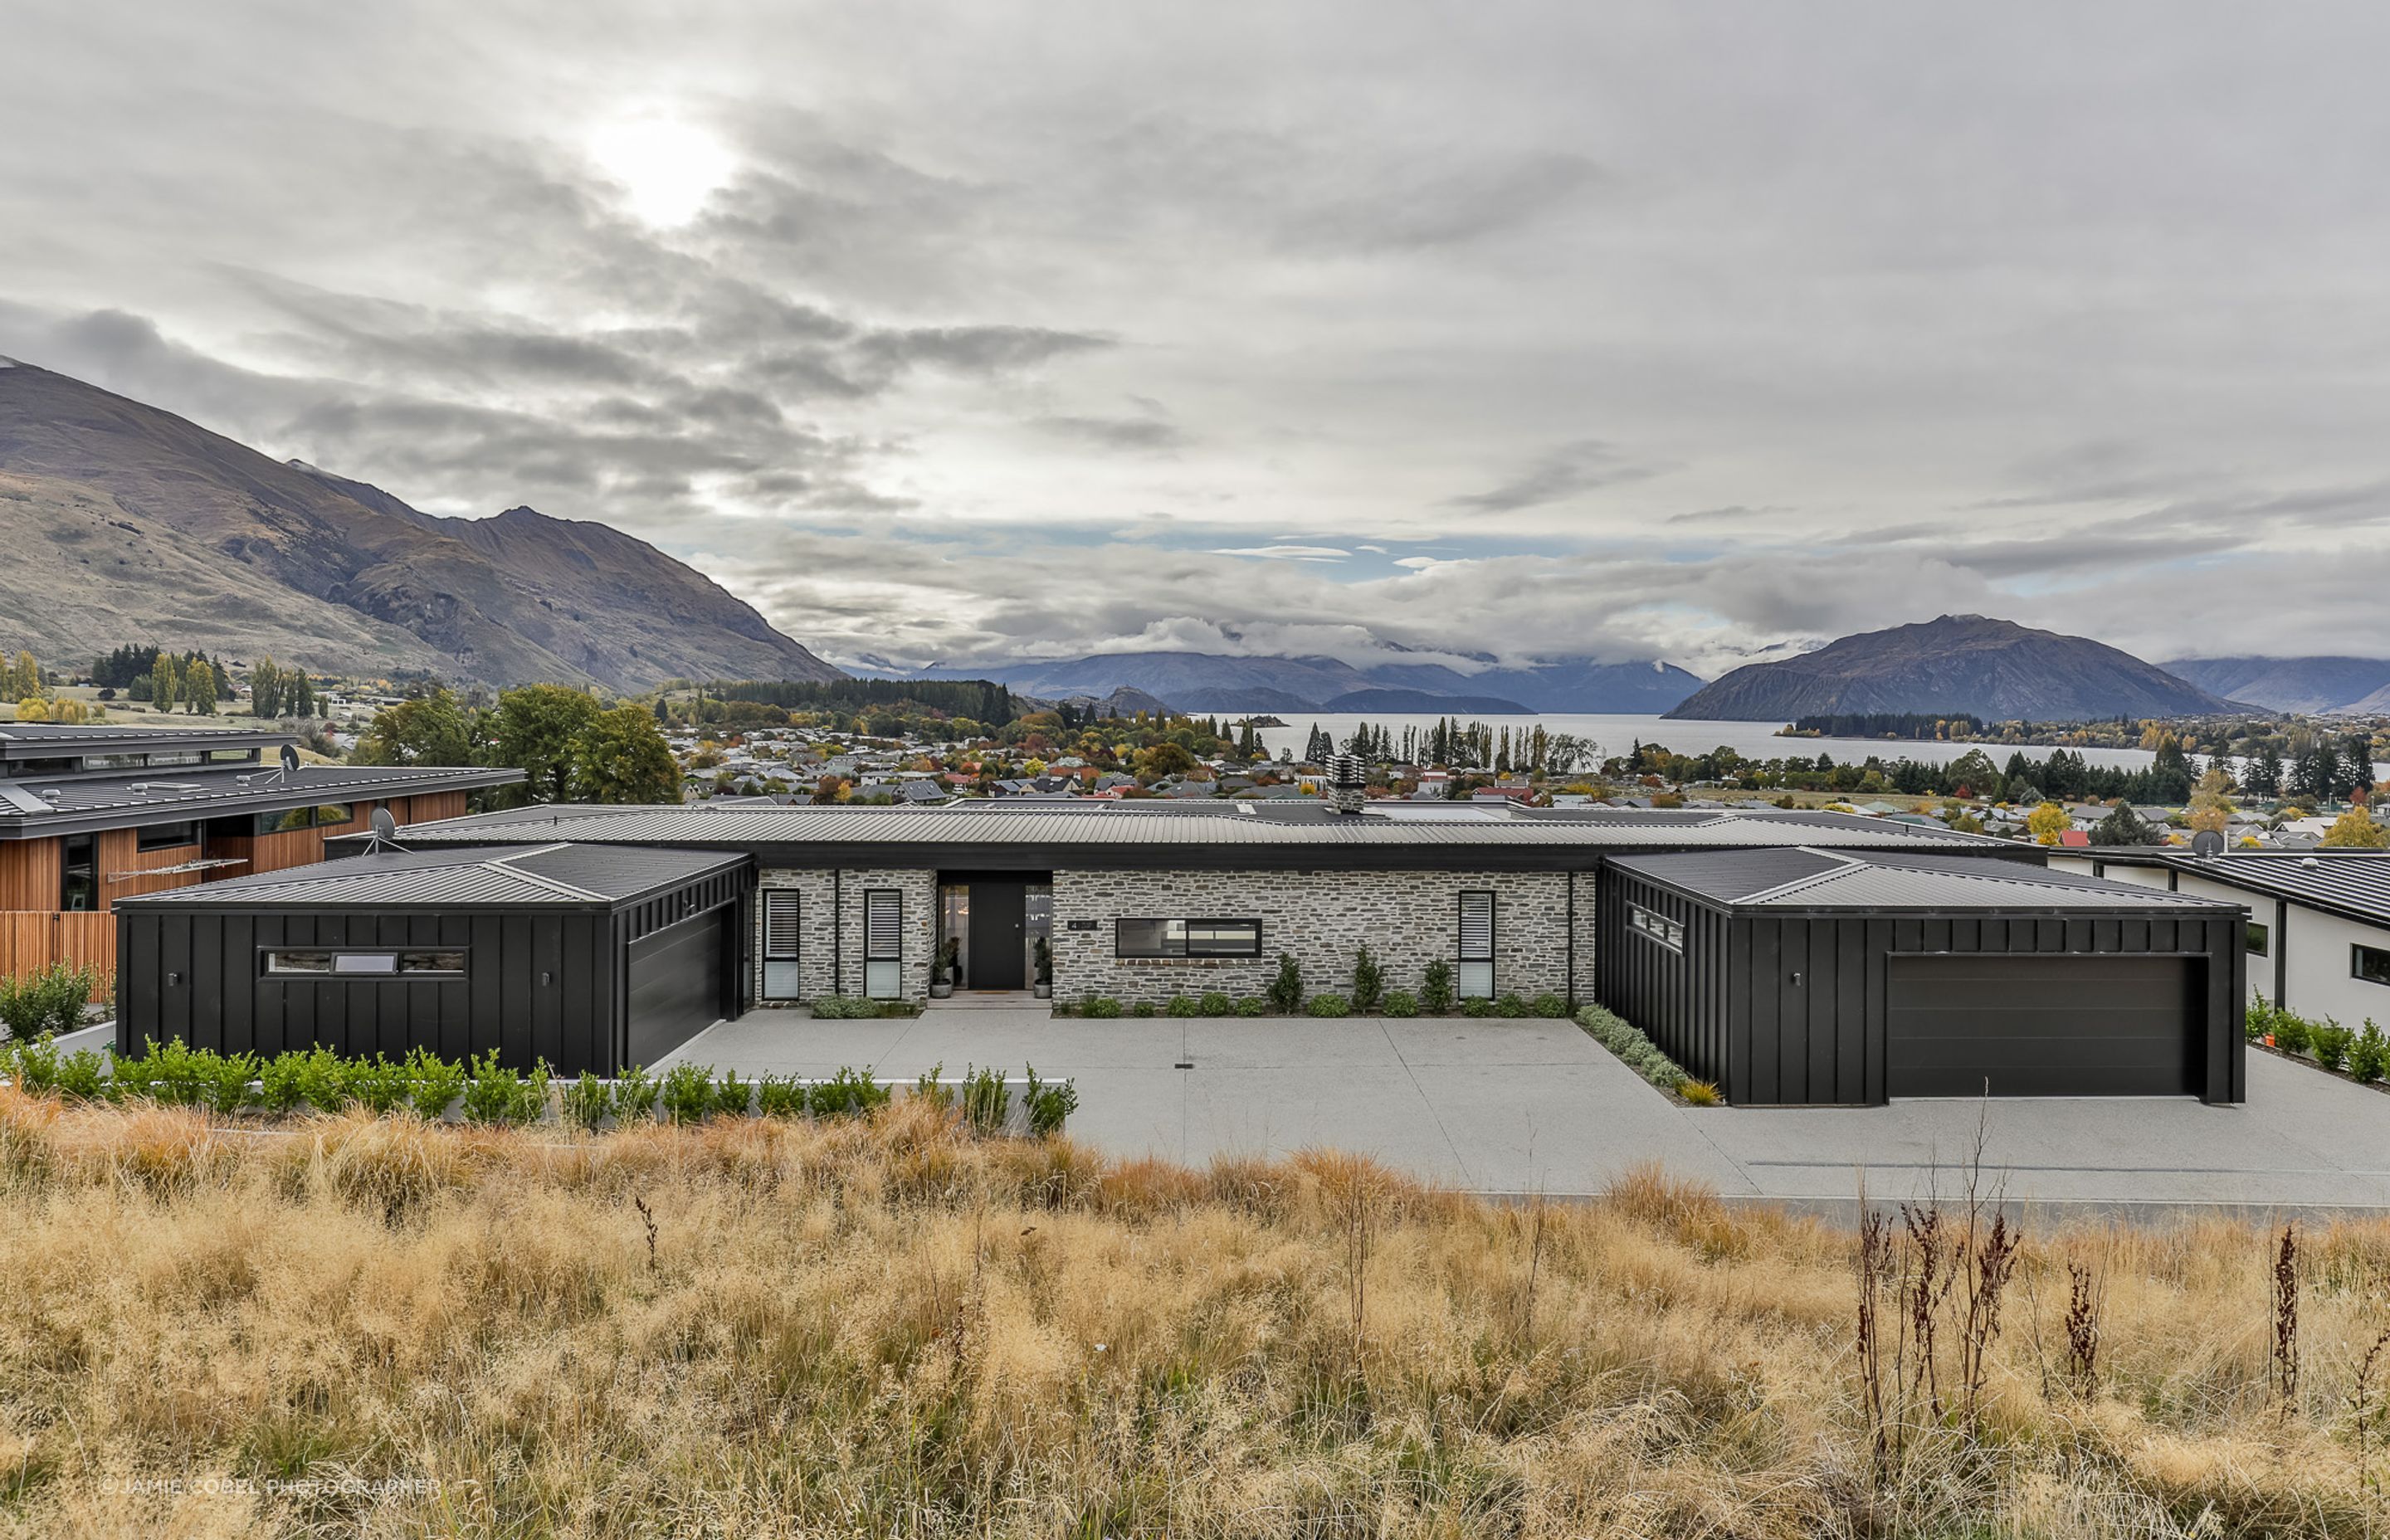 Dual garaging and ample off lane parking. Landscaping- by Tim at The Landscaper Wanaka.